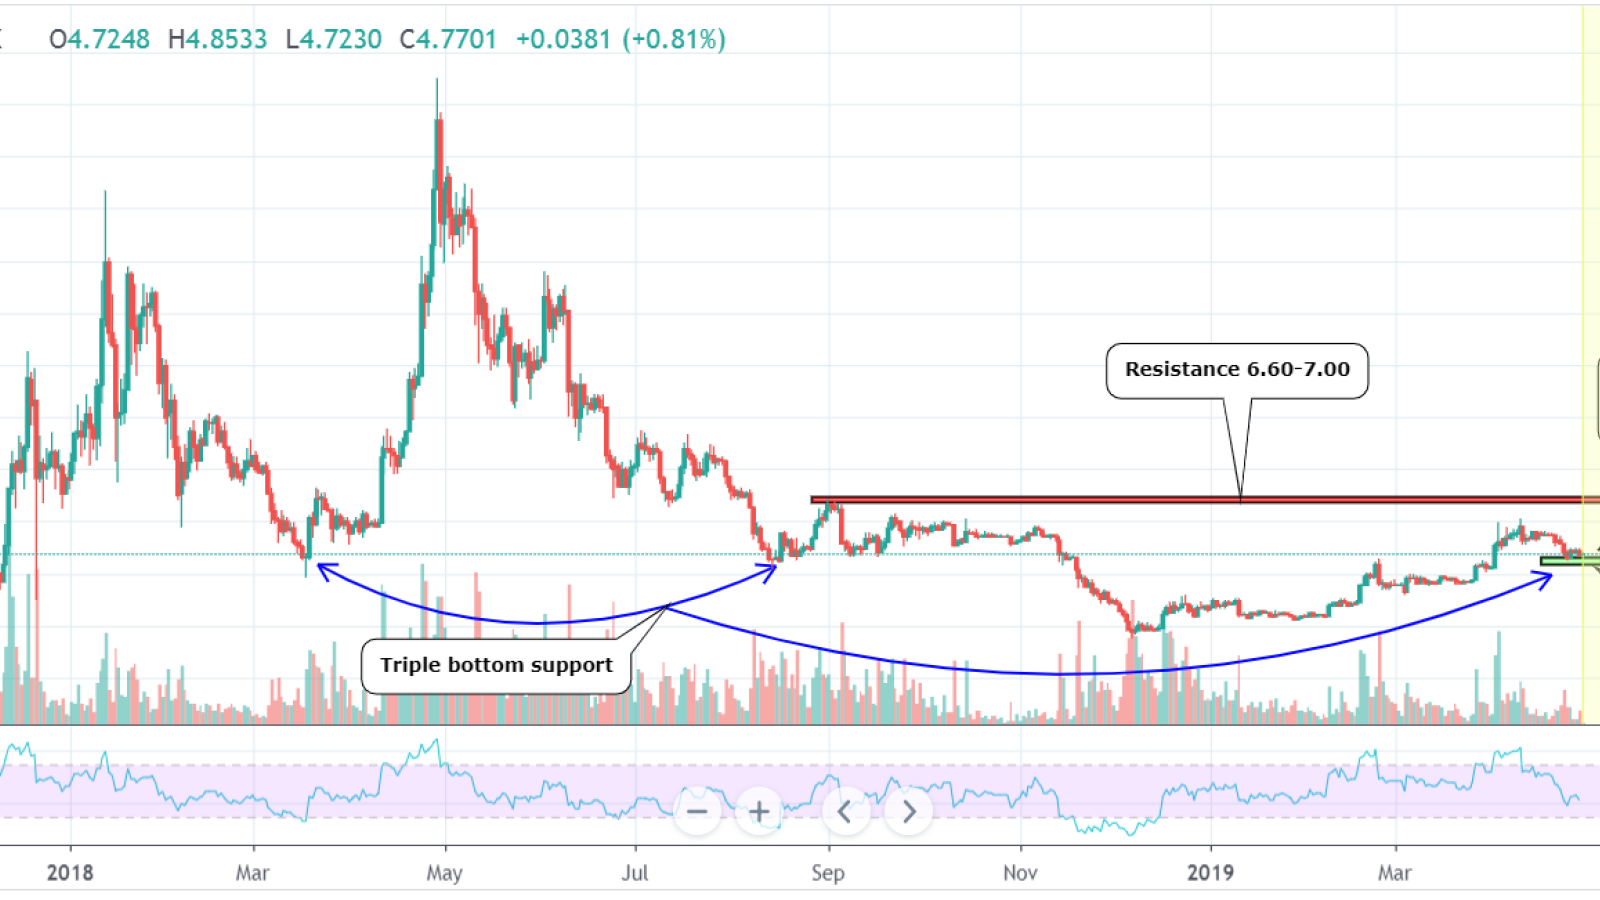 EOS has the potential to hit $6 resistance